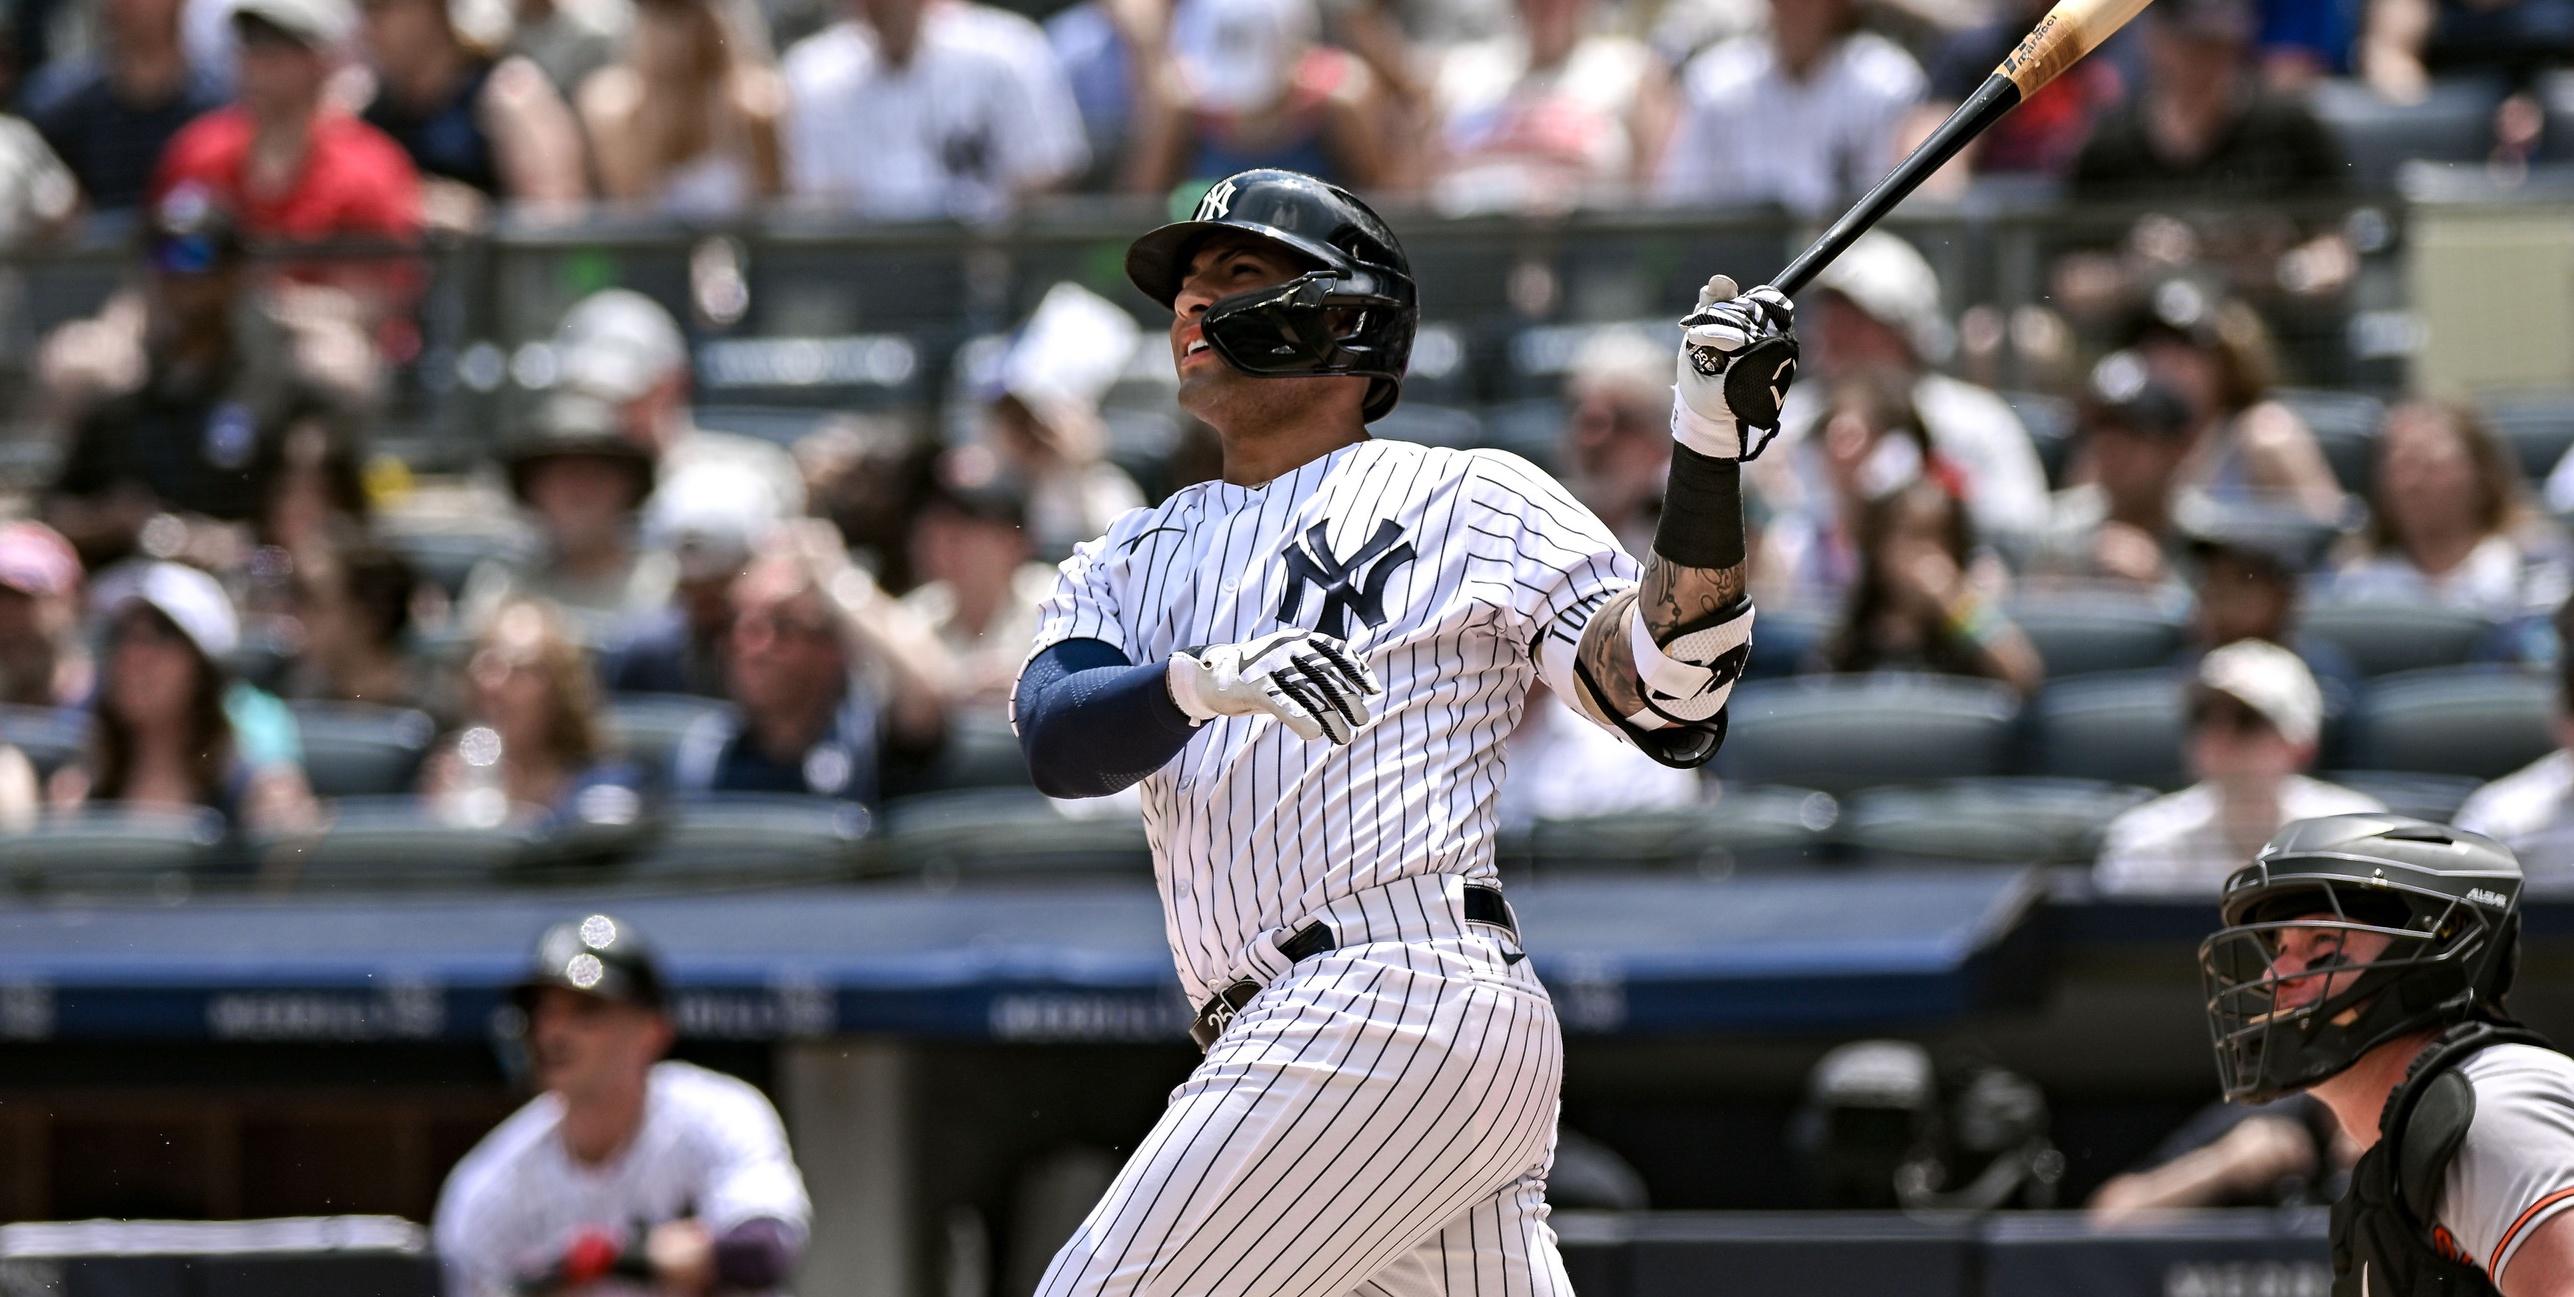 New York Yankees second baseman Gleyber Torres (25) hits a two-run home run against the Baltimore Orioles during the first inning at Yankee Stadium. / John Jones-USA TODAY Sports